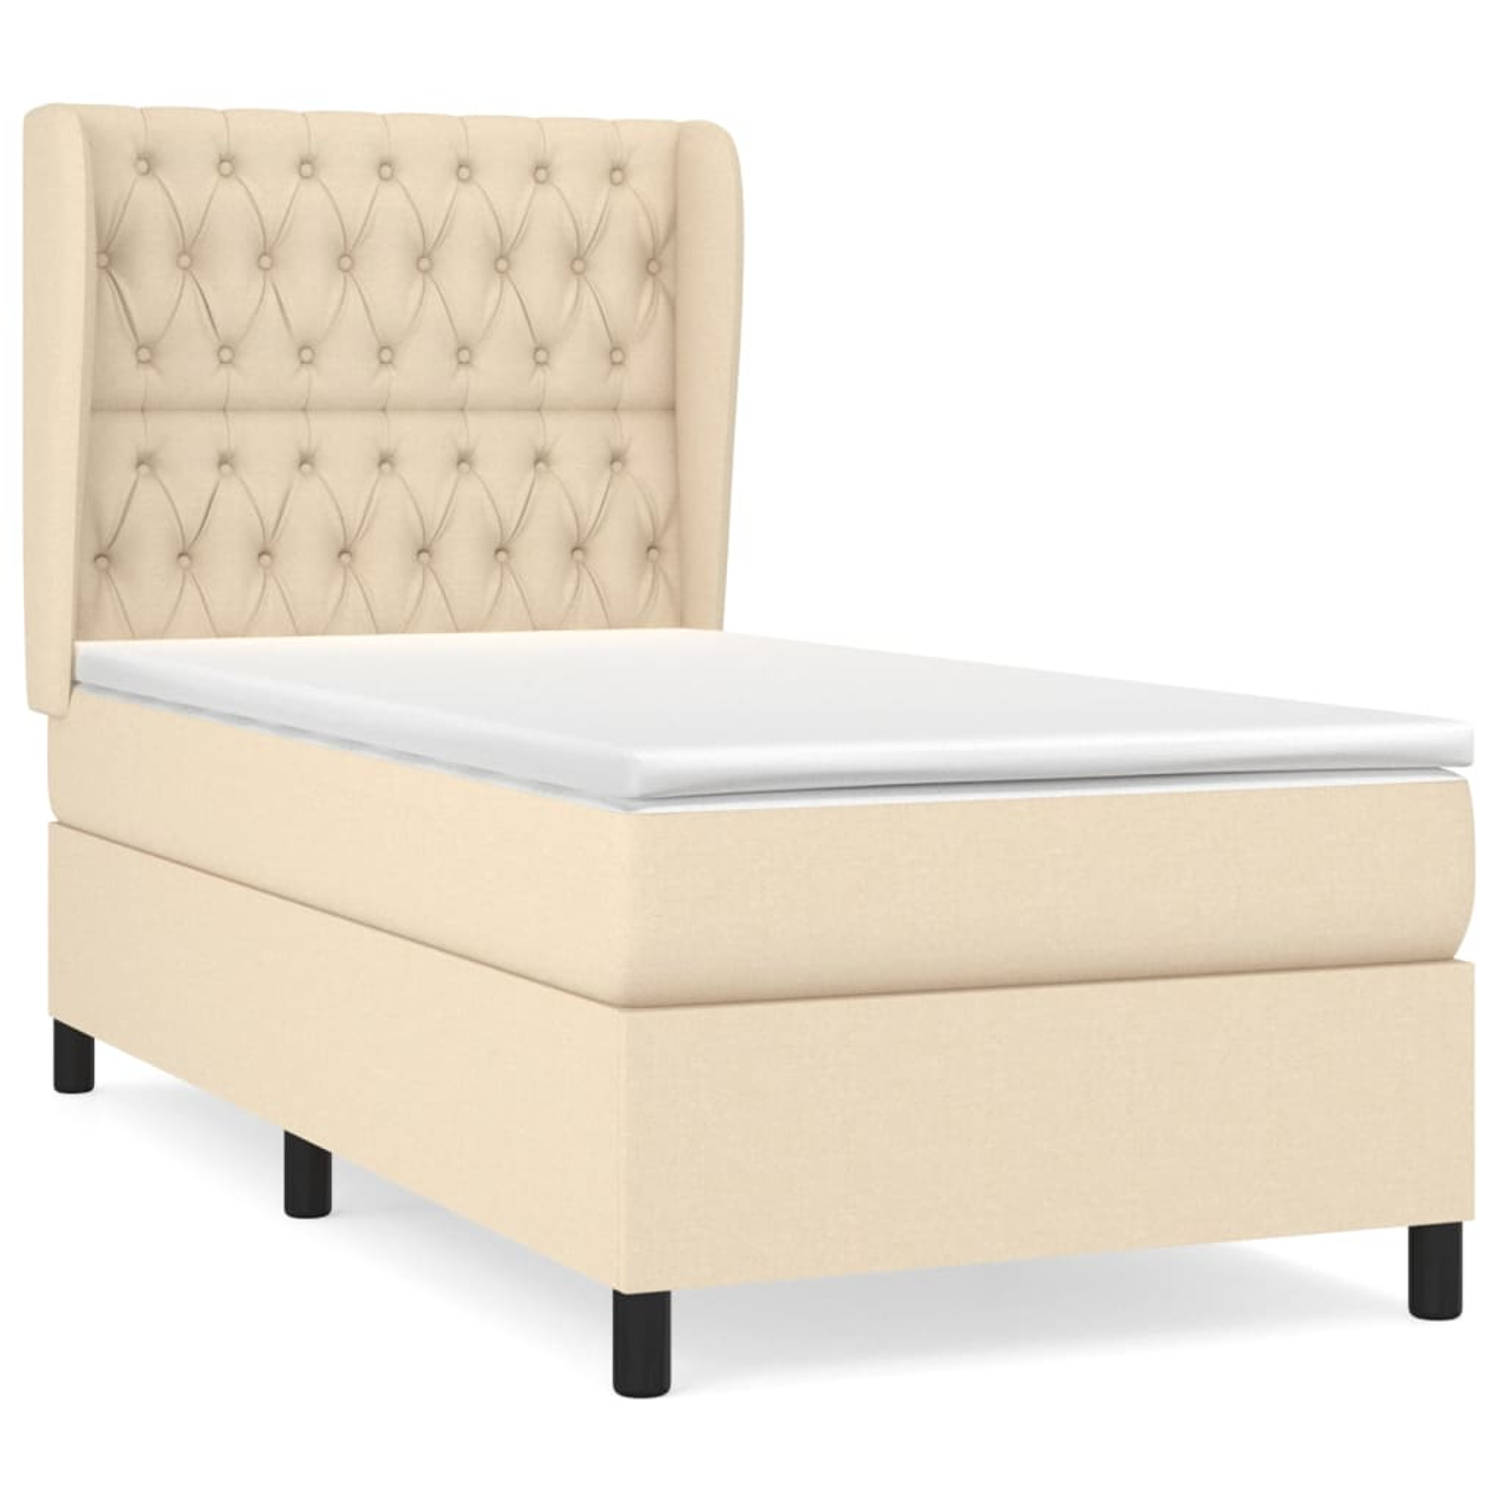 The Living Store Boxspringbed - Classic - Bed - 193x93x118/128 cm - Crème